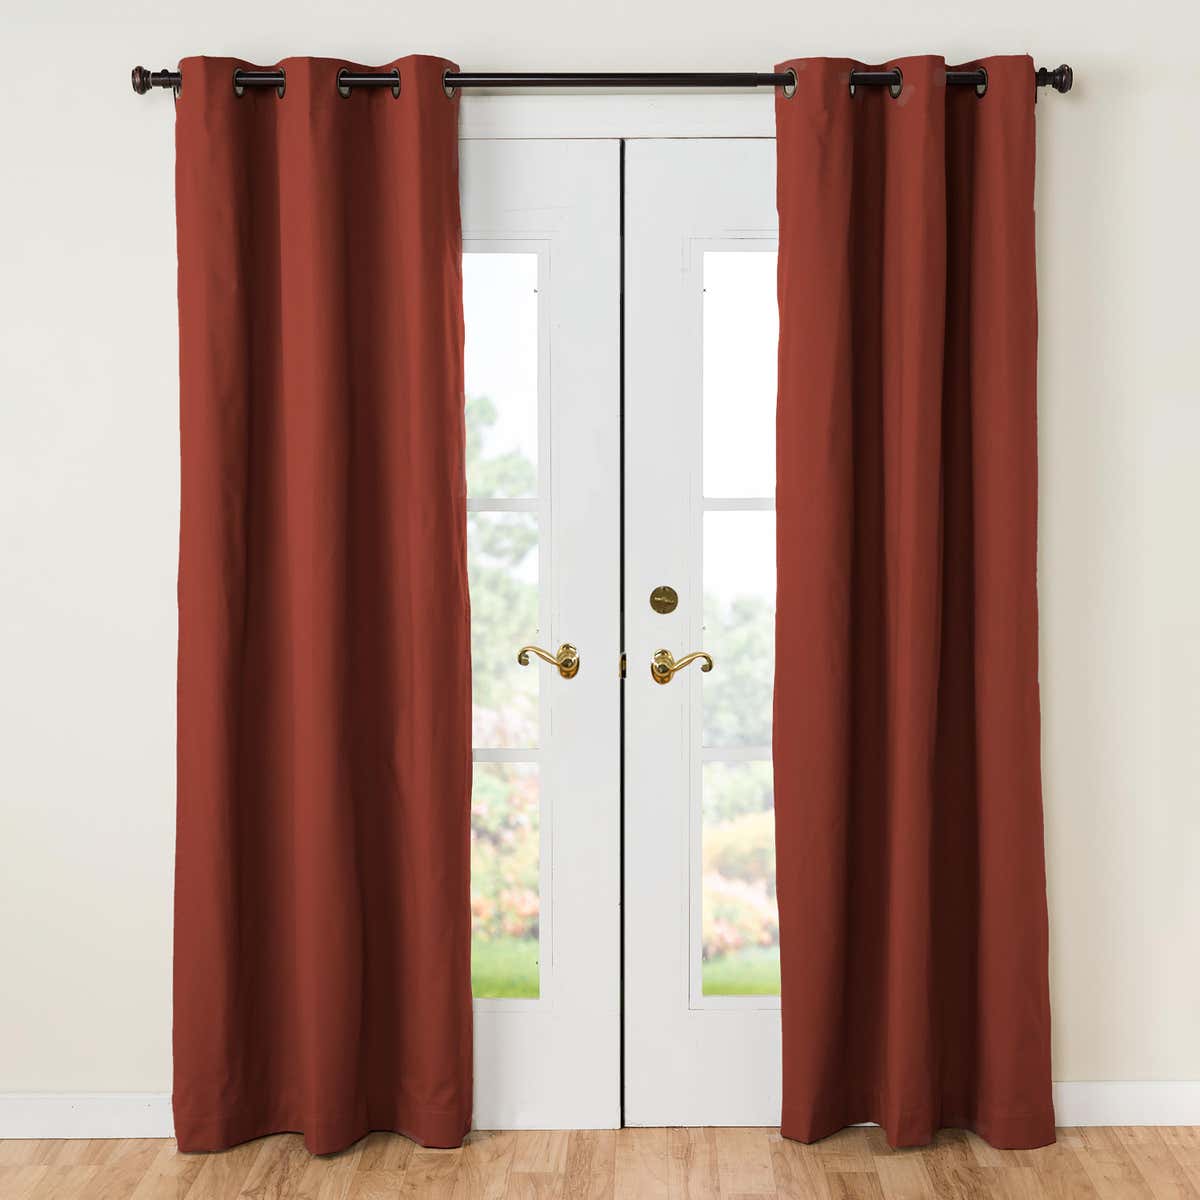 Thermalogic Insulated Grommet-Top Curtains 84" | eBay